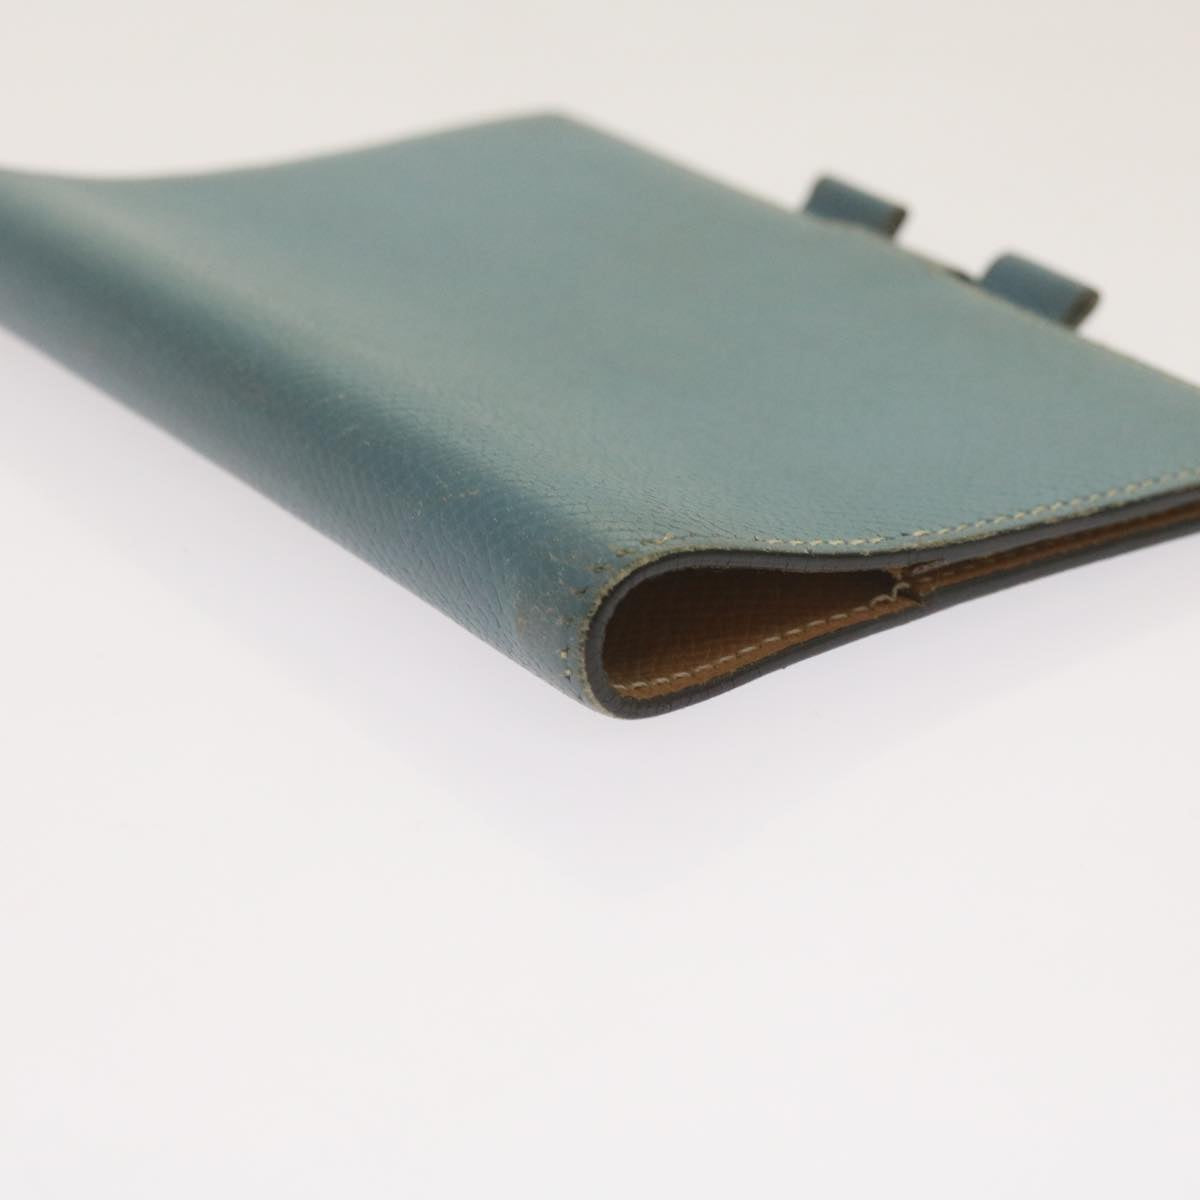 HERMES Agenda GM Day Planner Cover Leather Blue Auth am5960